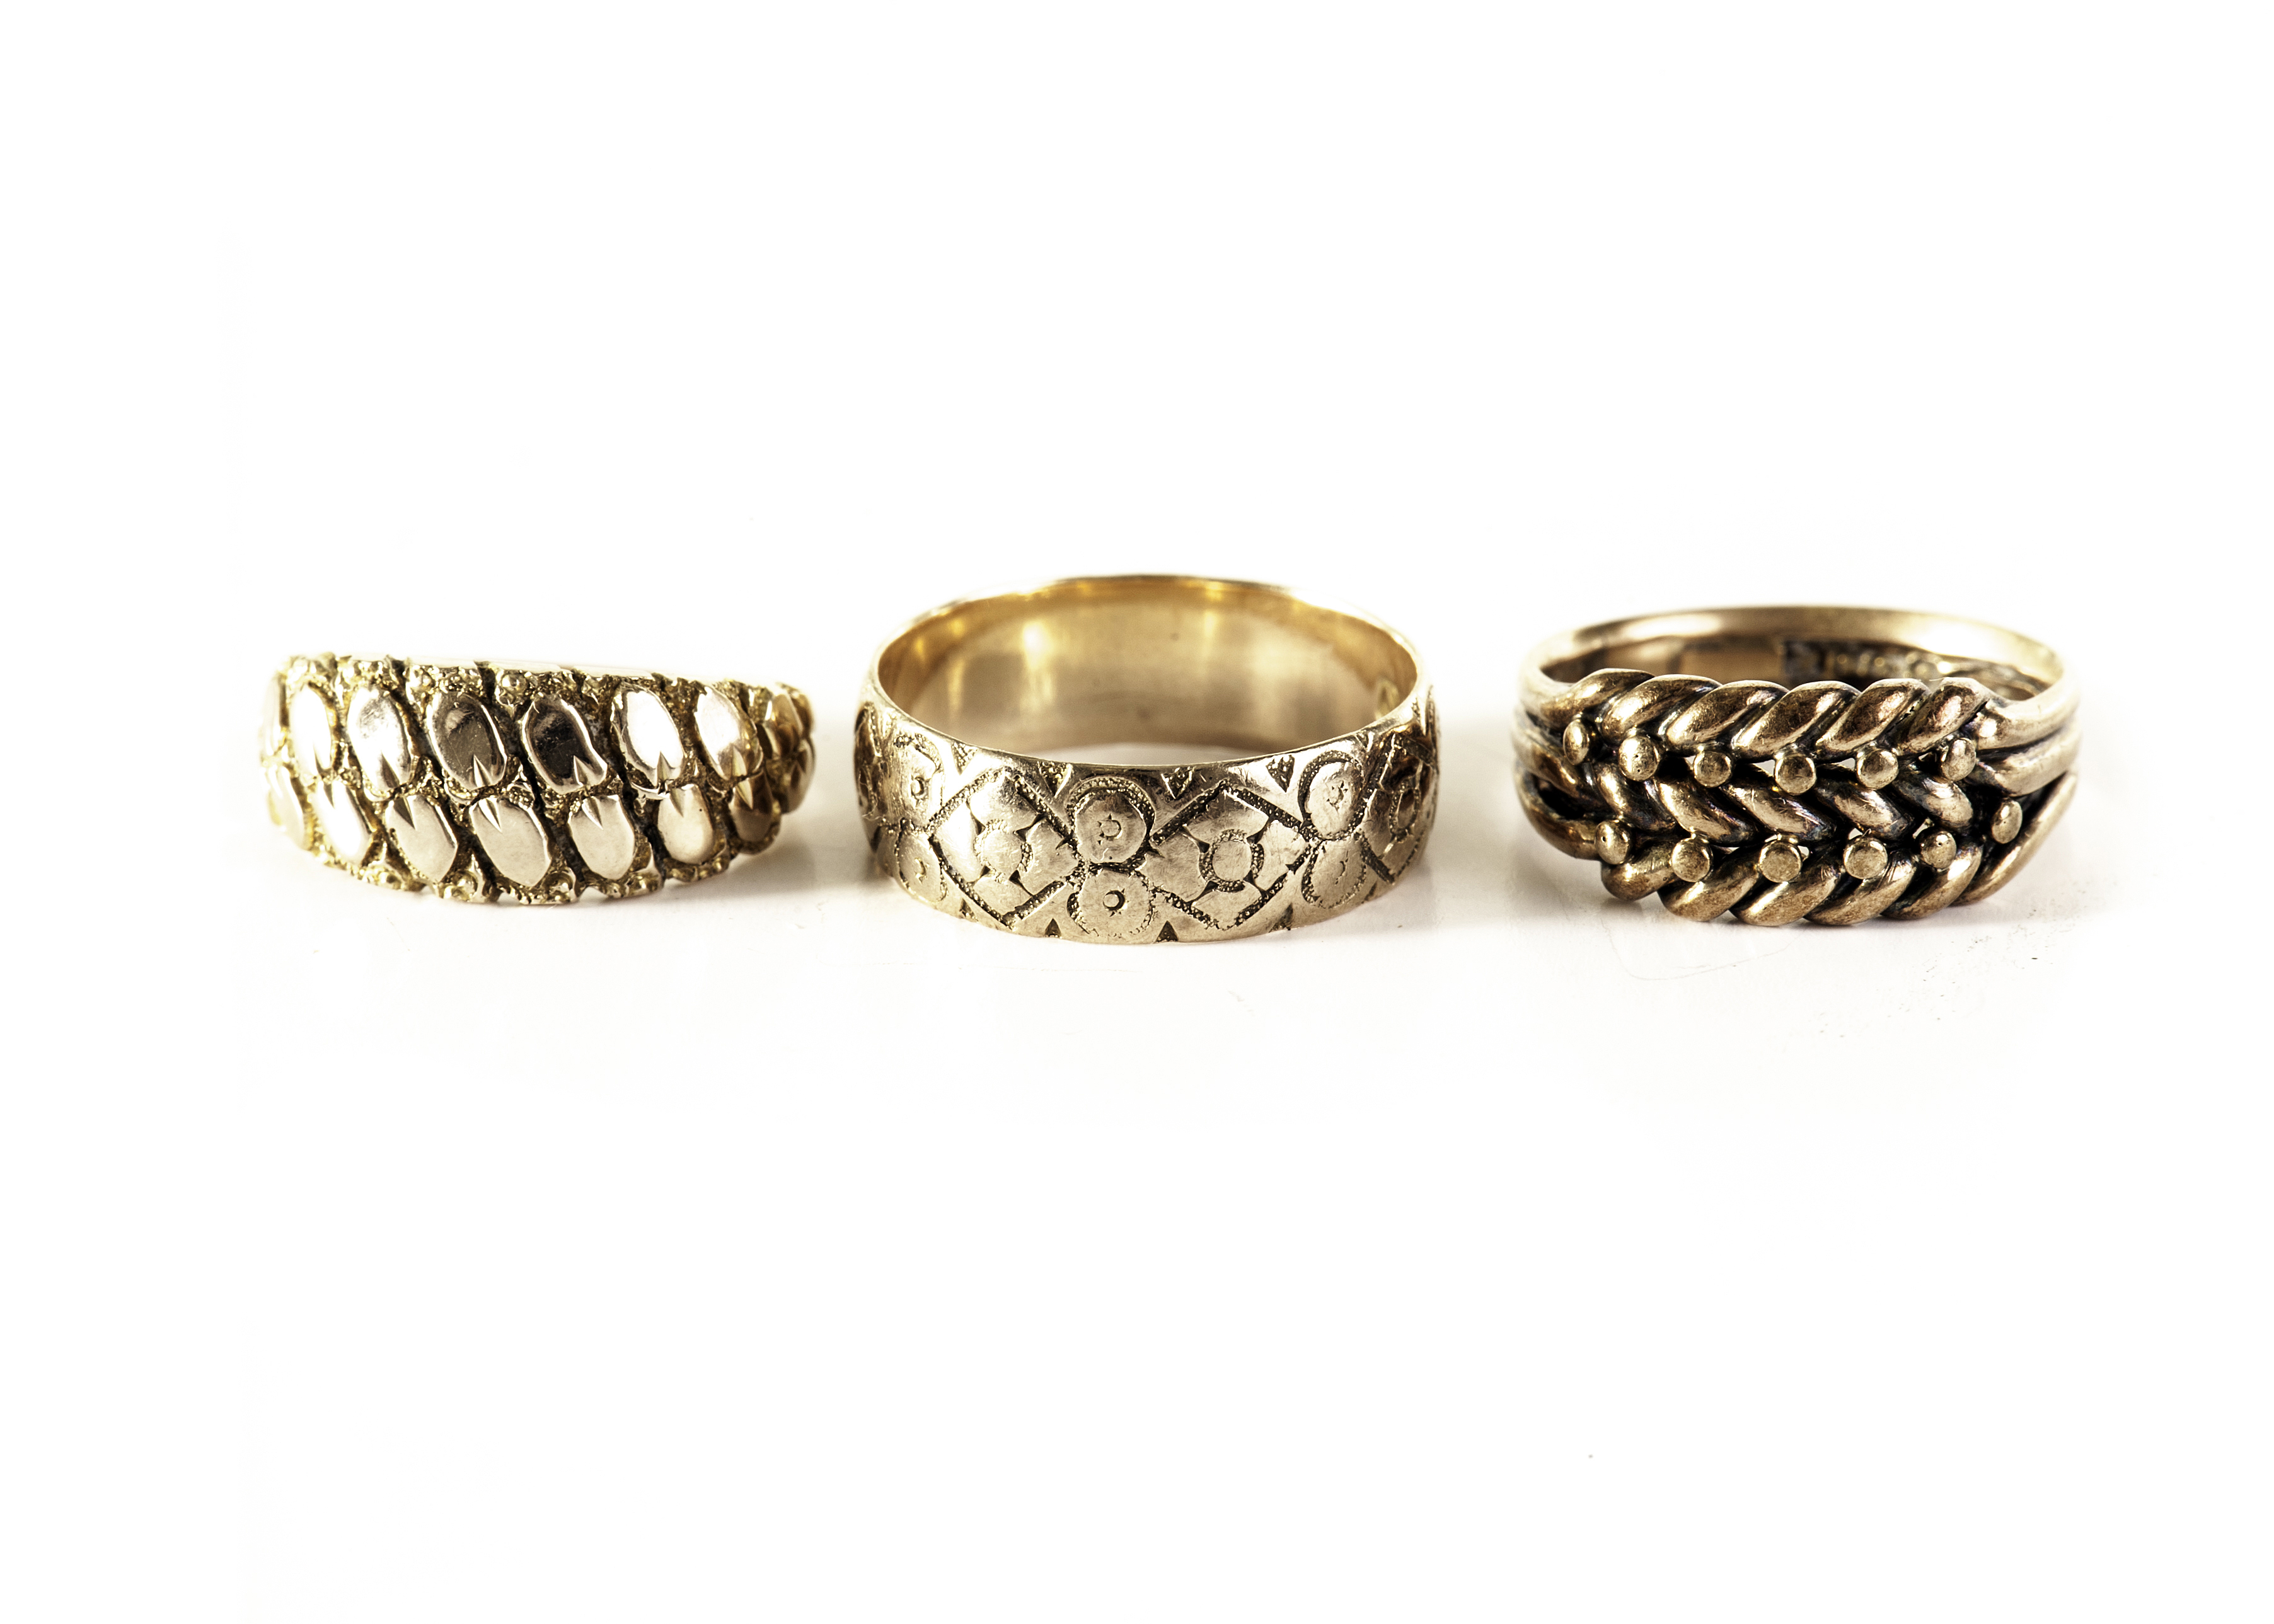 Three 9ct gold rings, each having different engraved or pierced design, approx 11.8g